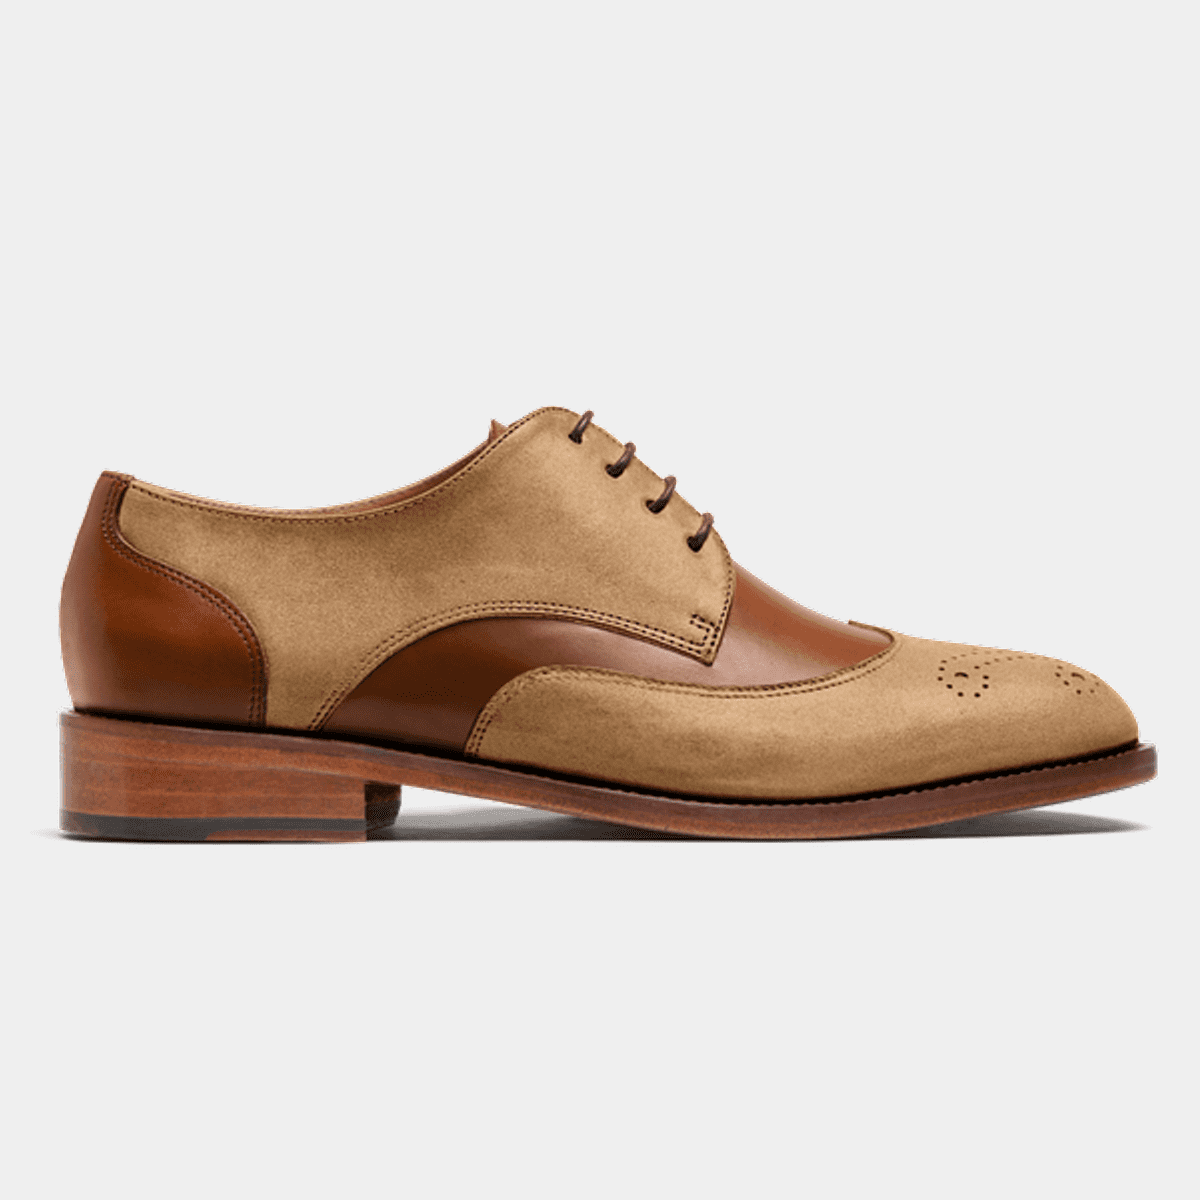 Wingtip Derby shoes - brown suede & leather